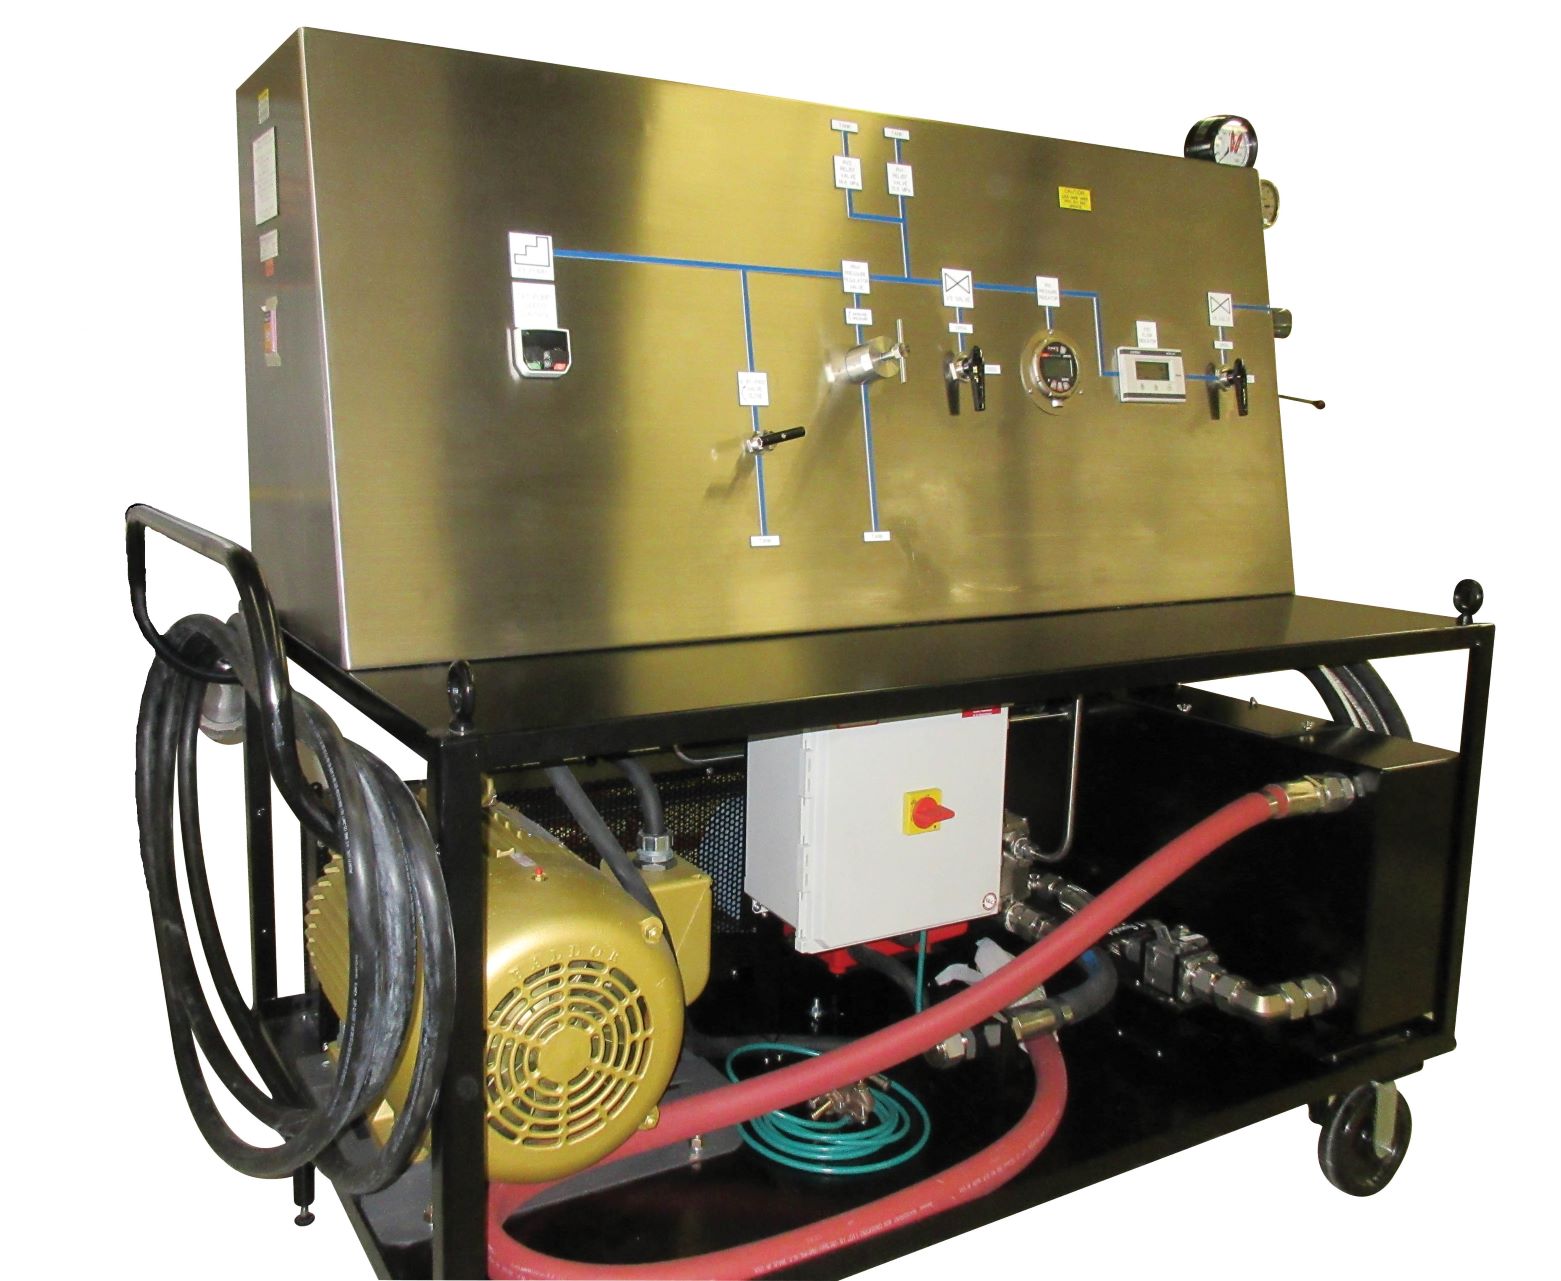 new-phts-hydrostatic-pressure-tester-supplied-to-opg-darlington-technel-engineering-inc